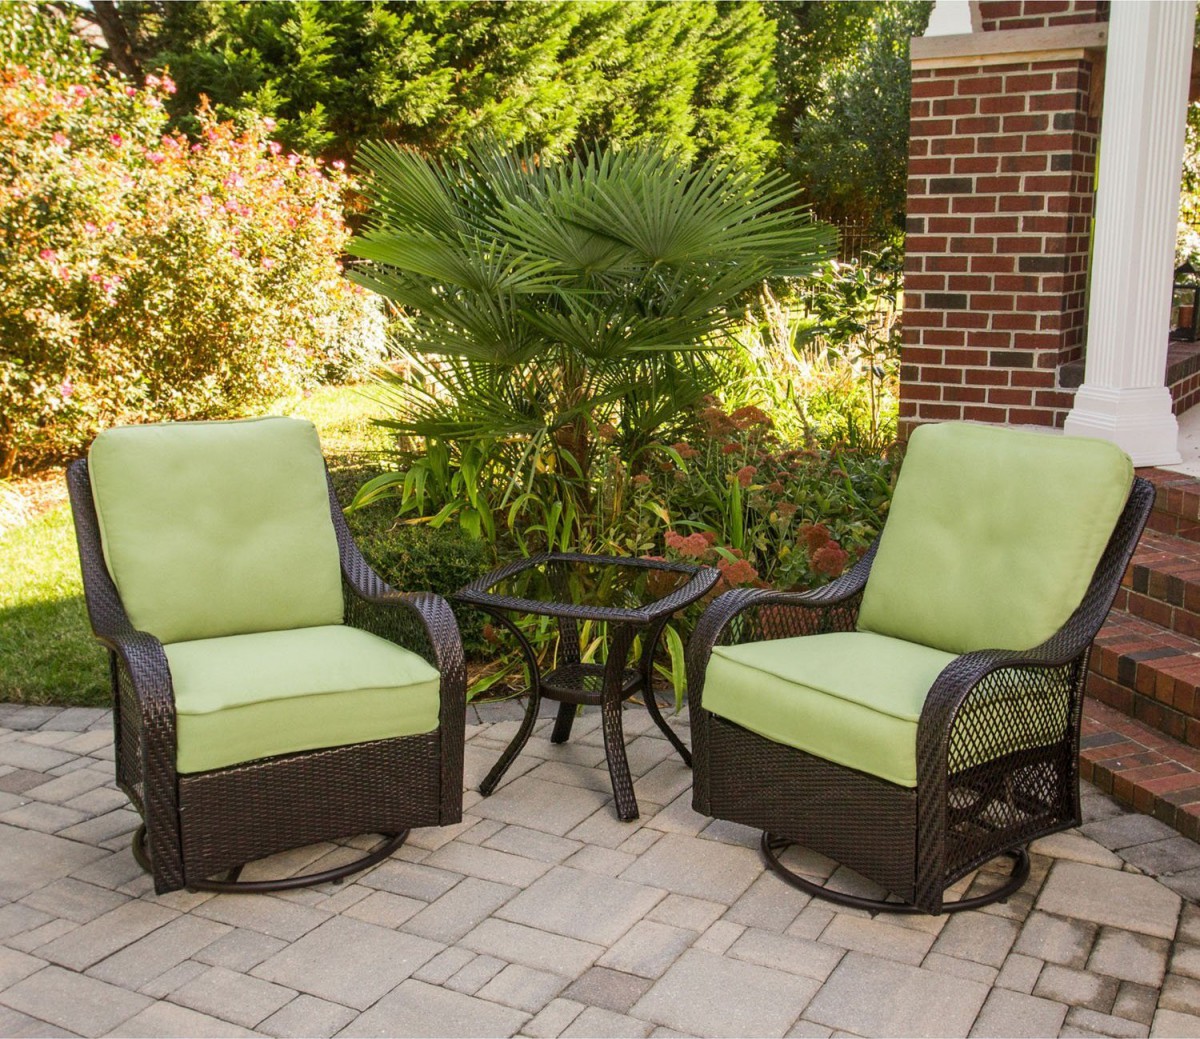 Hanover Orleans 3 Piece Outdoor Bistro Set with Swivel Glider Chairs